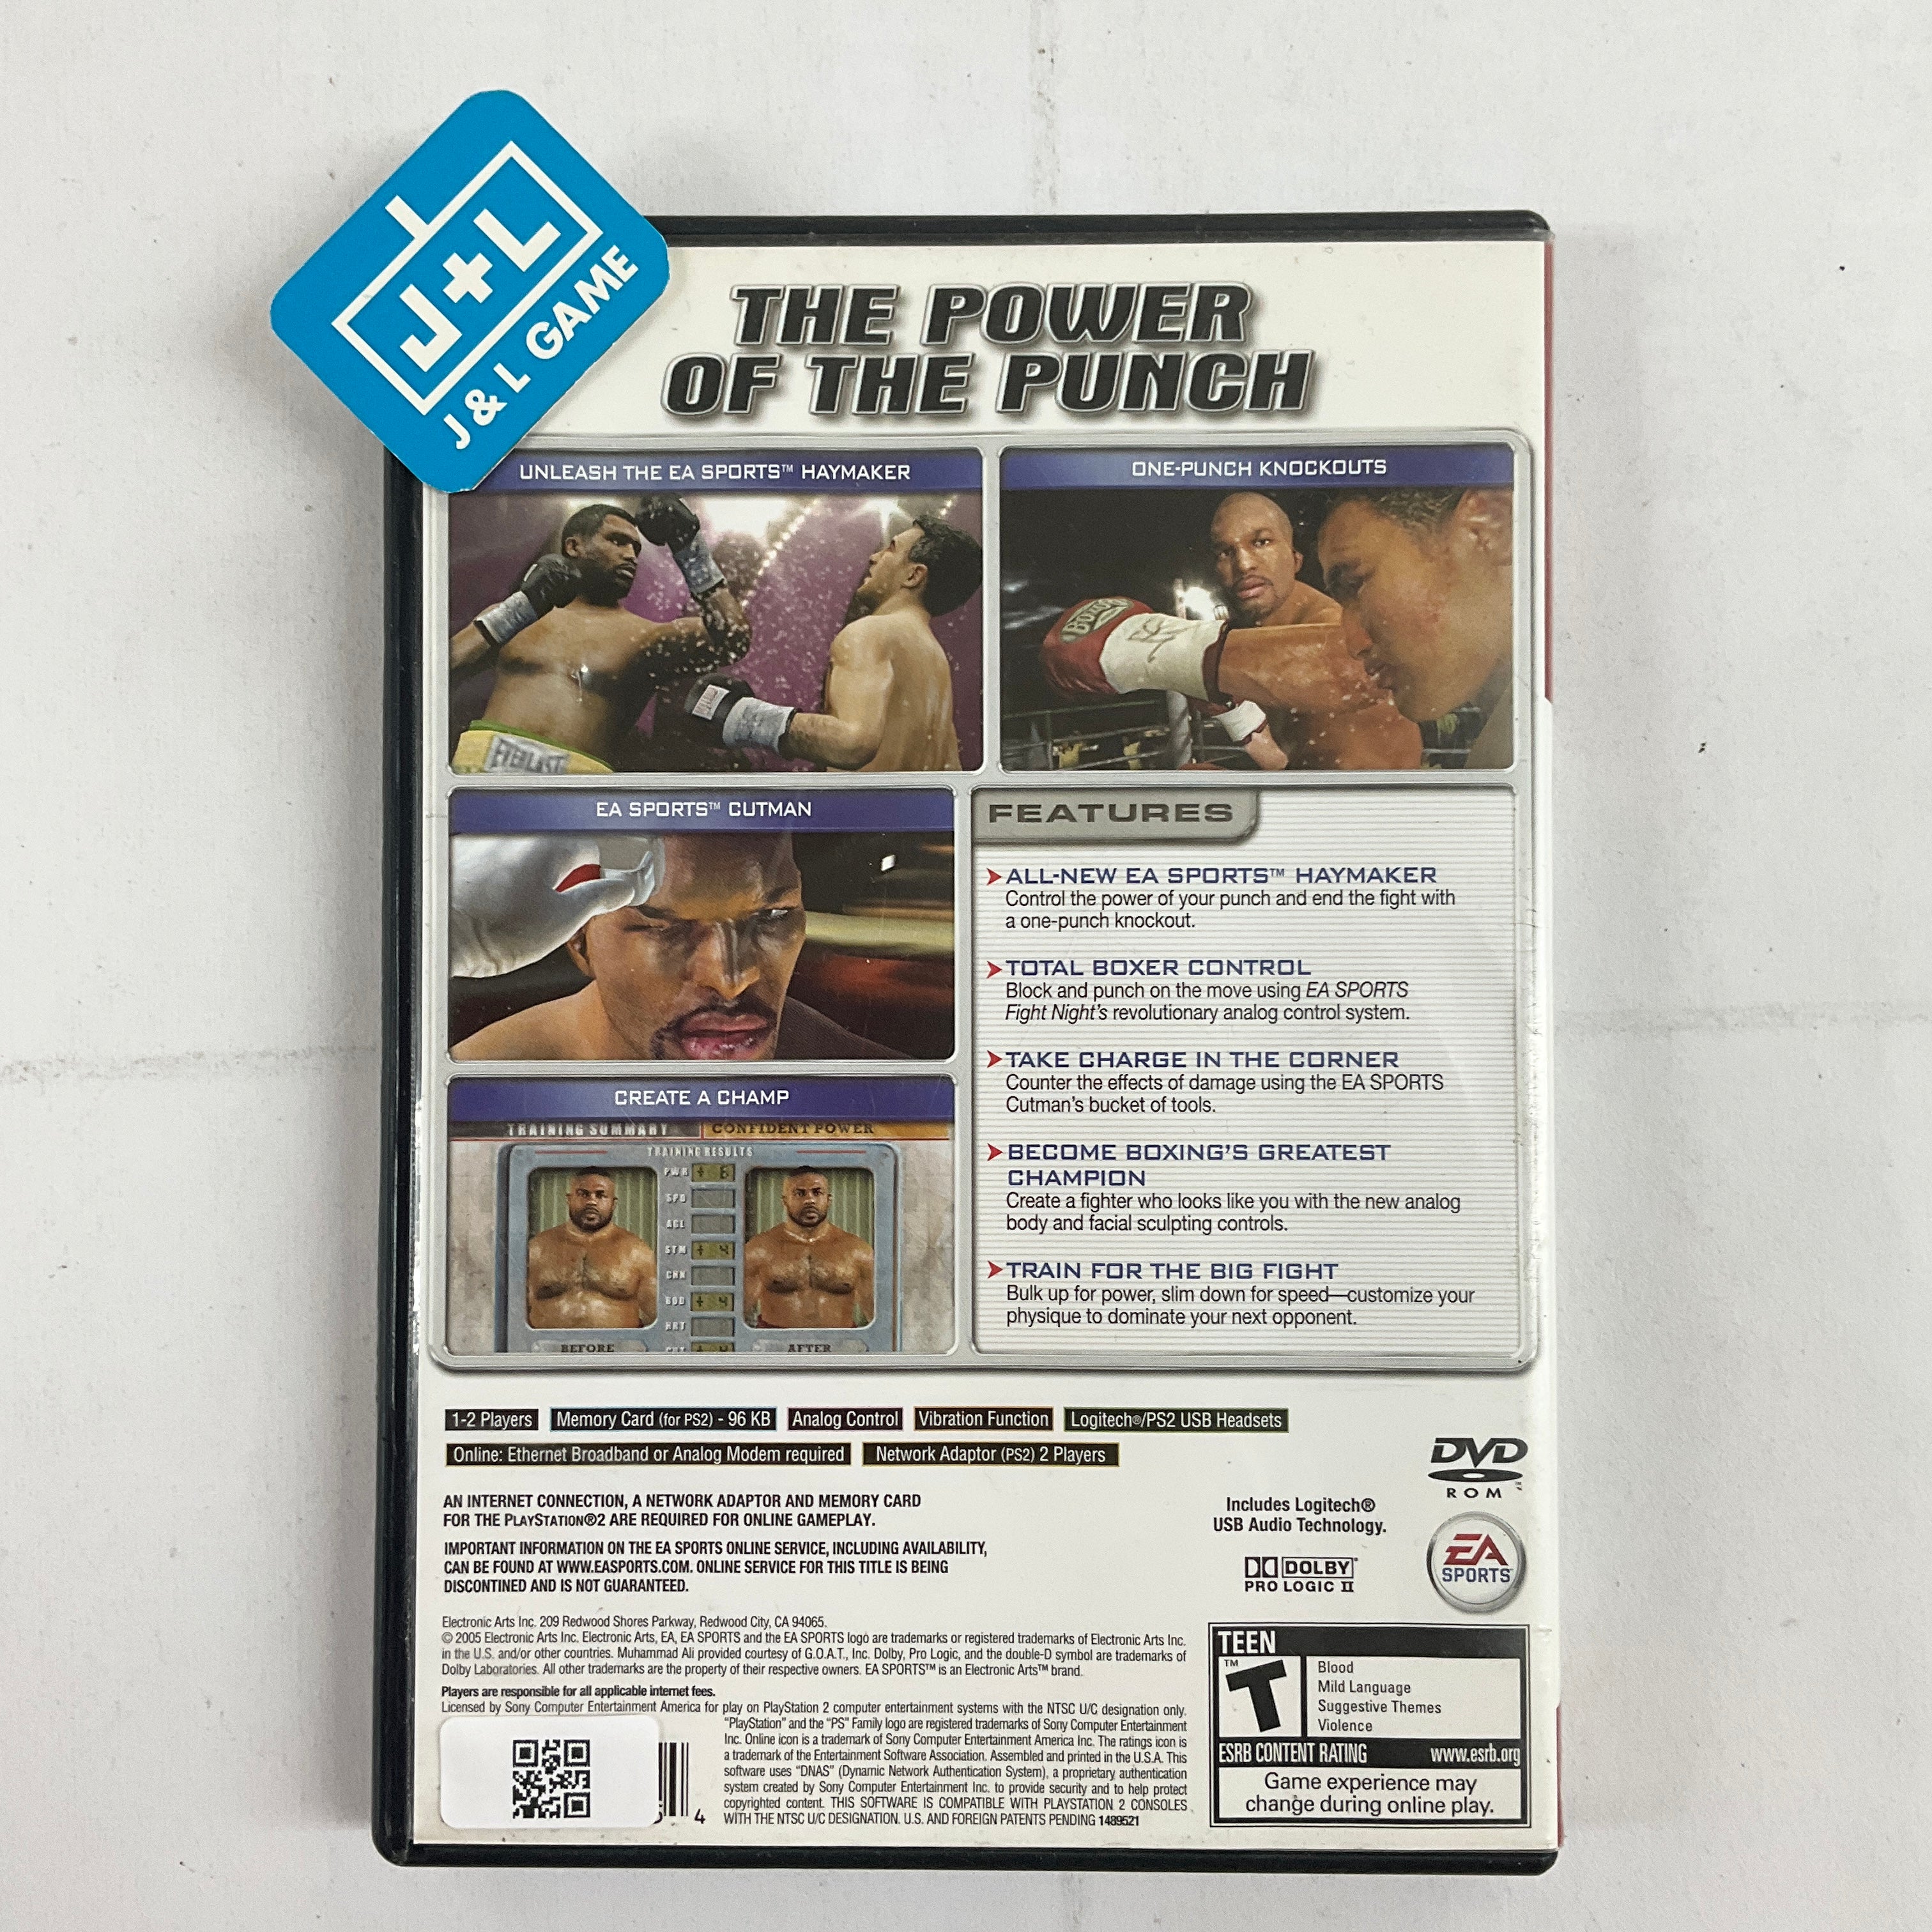 Fight Night Round 2 (Greatest Hits) - (PS2) PlayStation 2 [Pre-Owned] Video Games EA Sports   